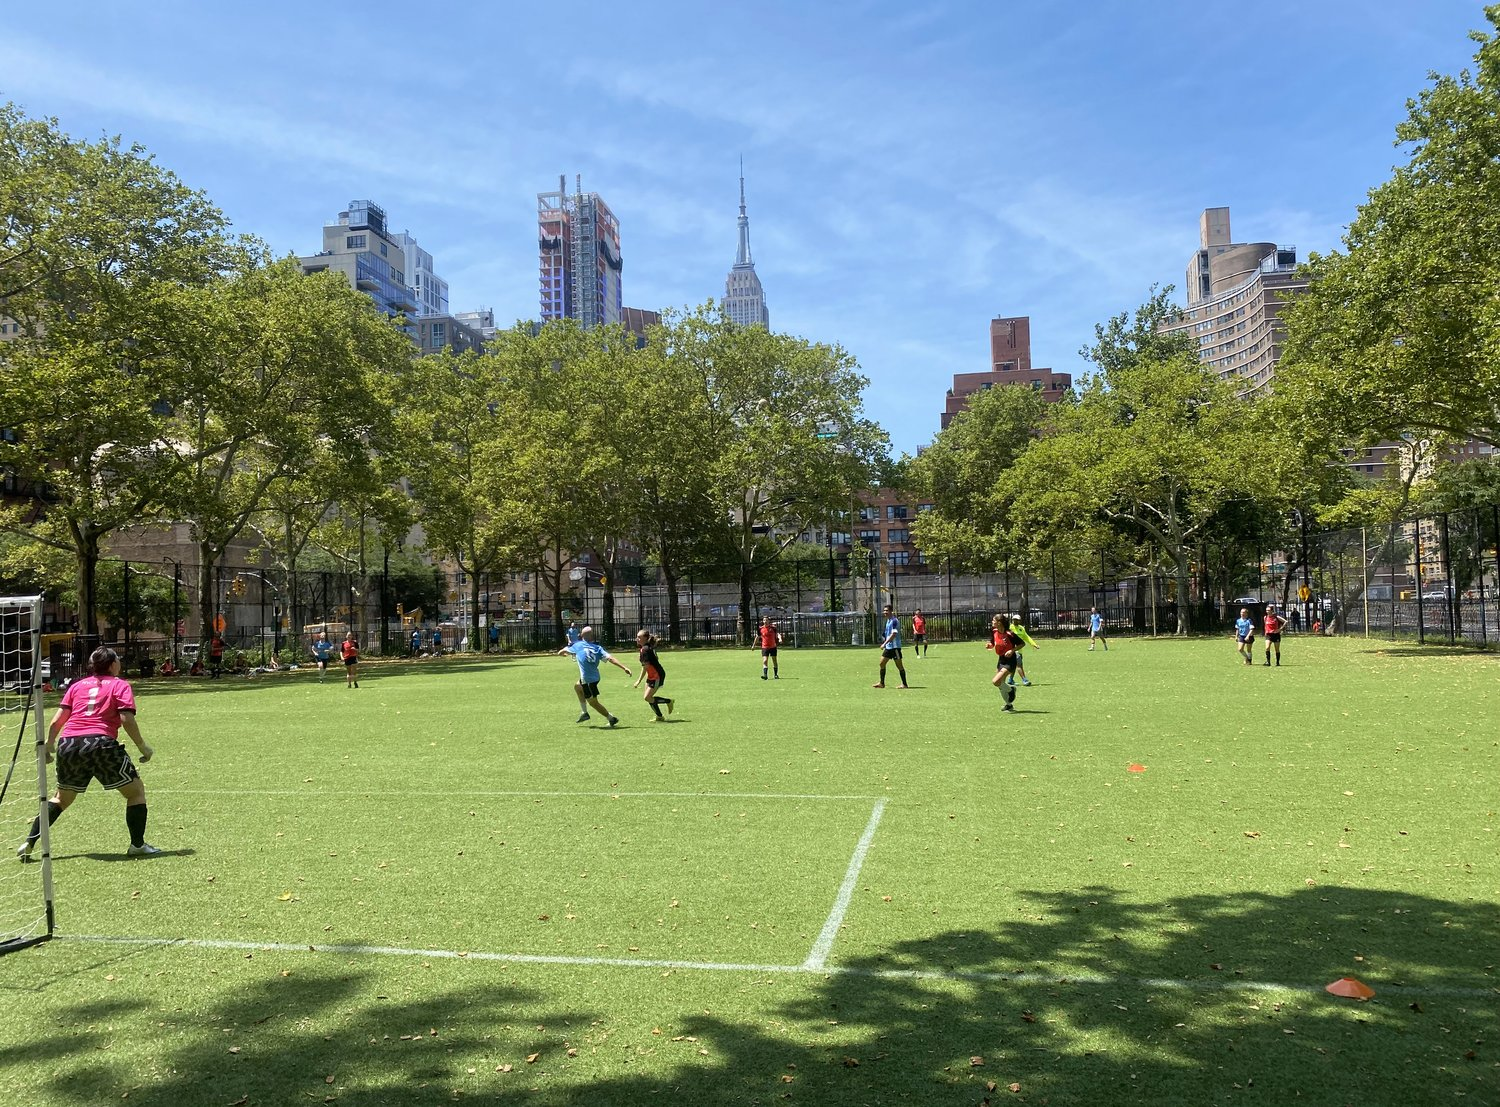 It may seem tough, but securing a NYC park permit is not that hard!